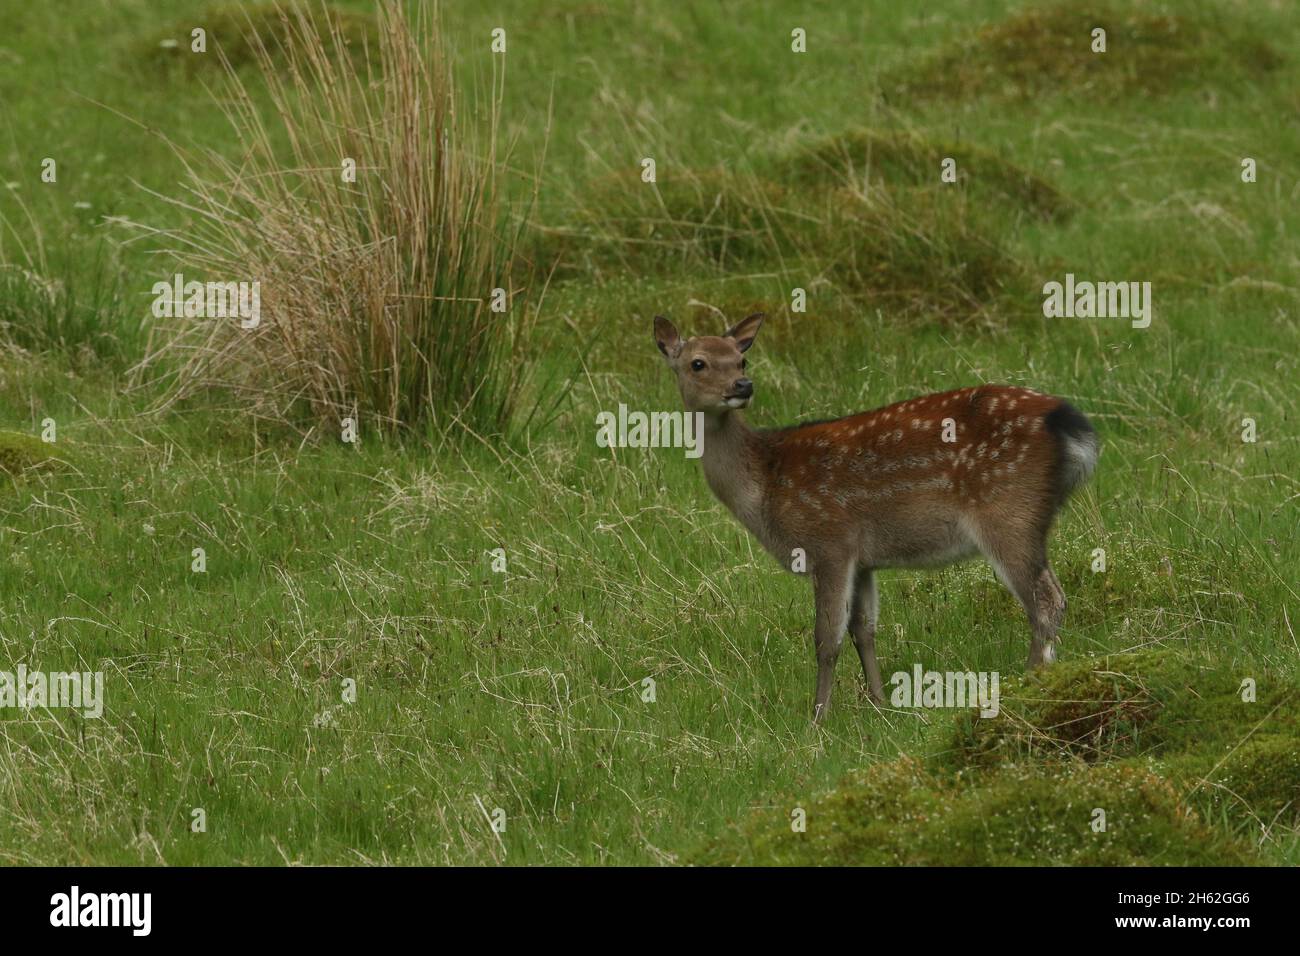 Sika deer doe, image taken in typical habitat of grasses and sedges near to coniferous woodland.  Yellow brown fur with white spots and a small head. Stock Photo